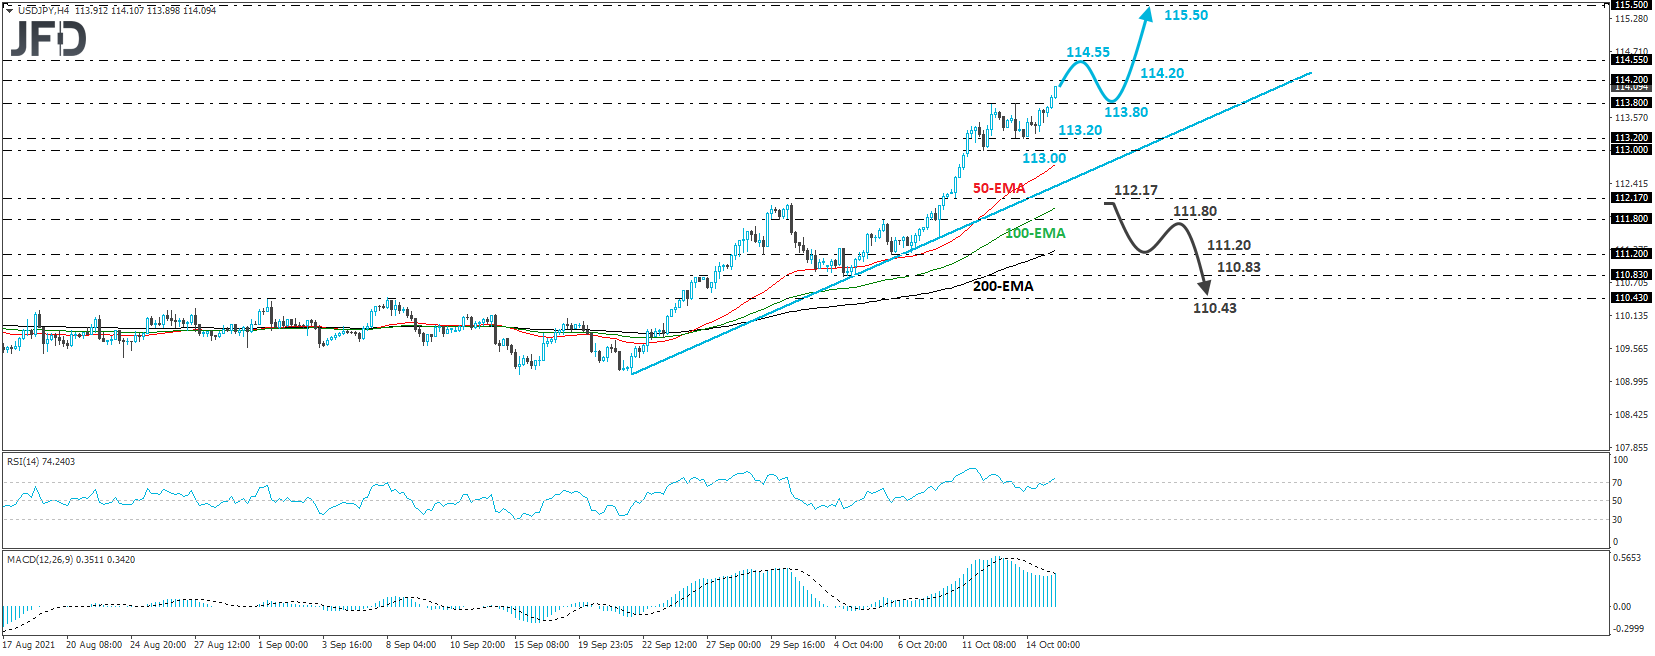 USD/JPY technical analysis 4-hour chart.